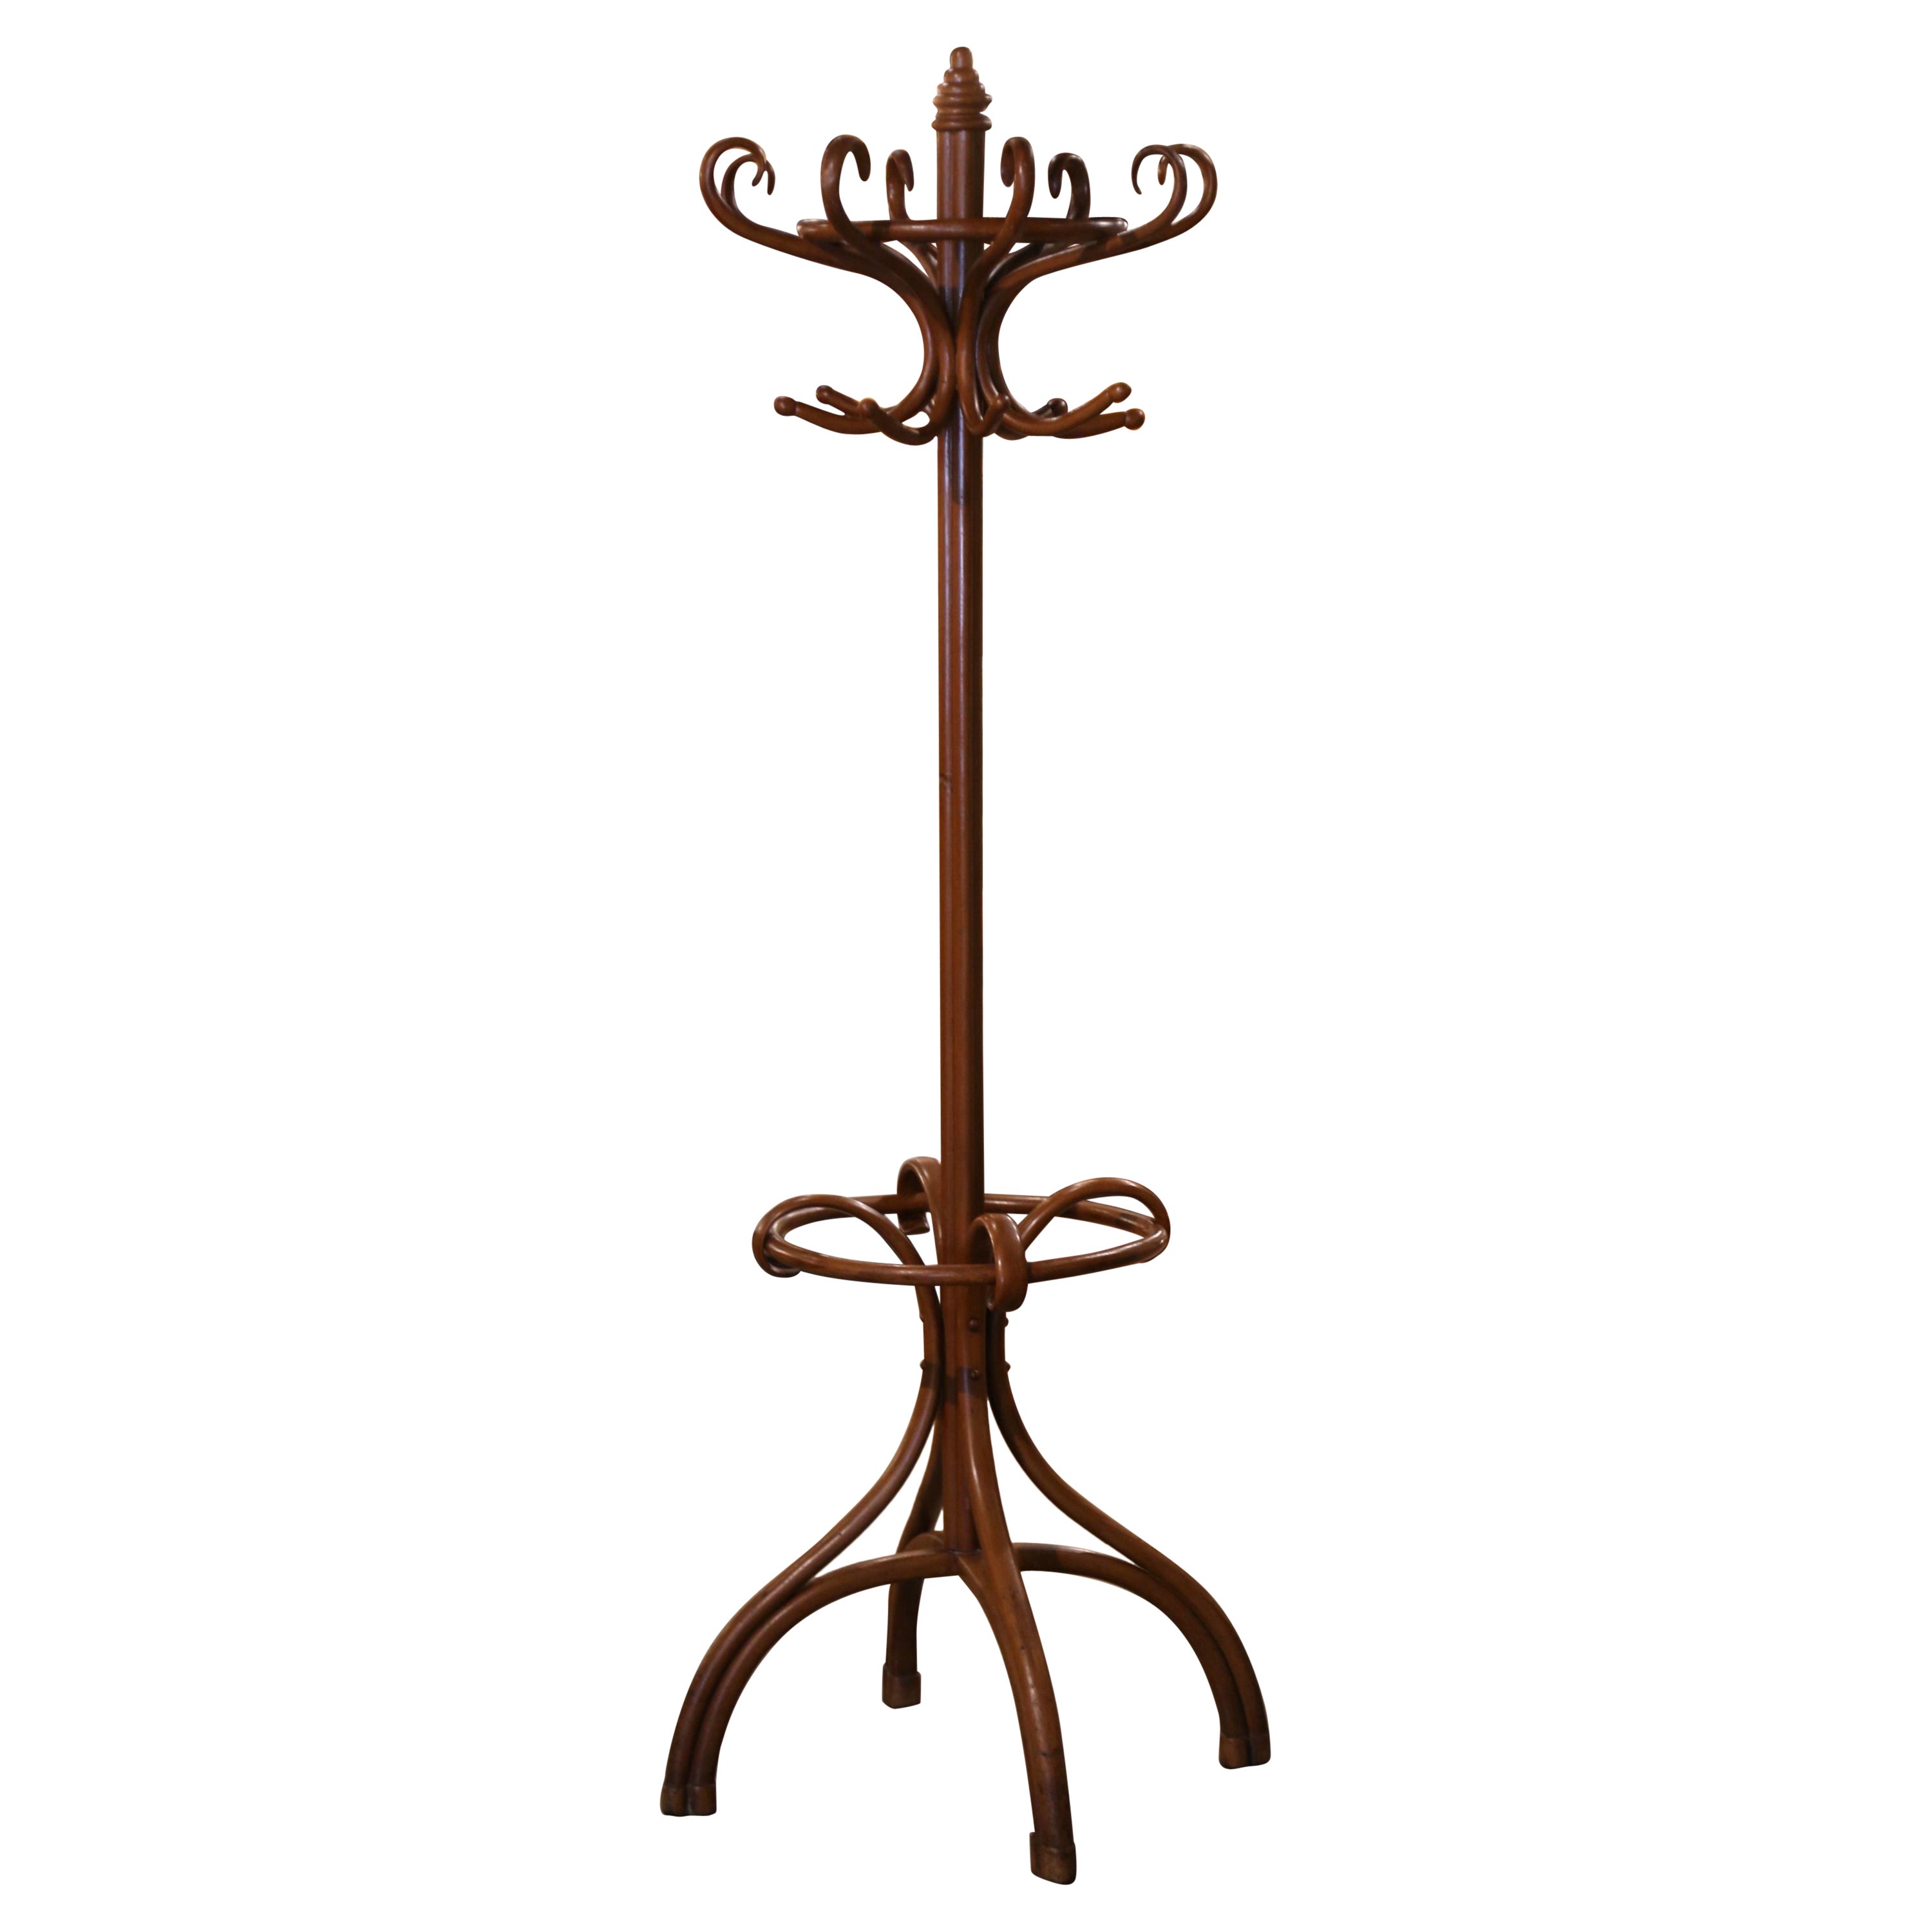 Early 20th Century Carved Bentwood "Perroquet" Coat Stand Thonet Style